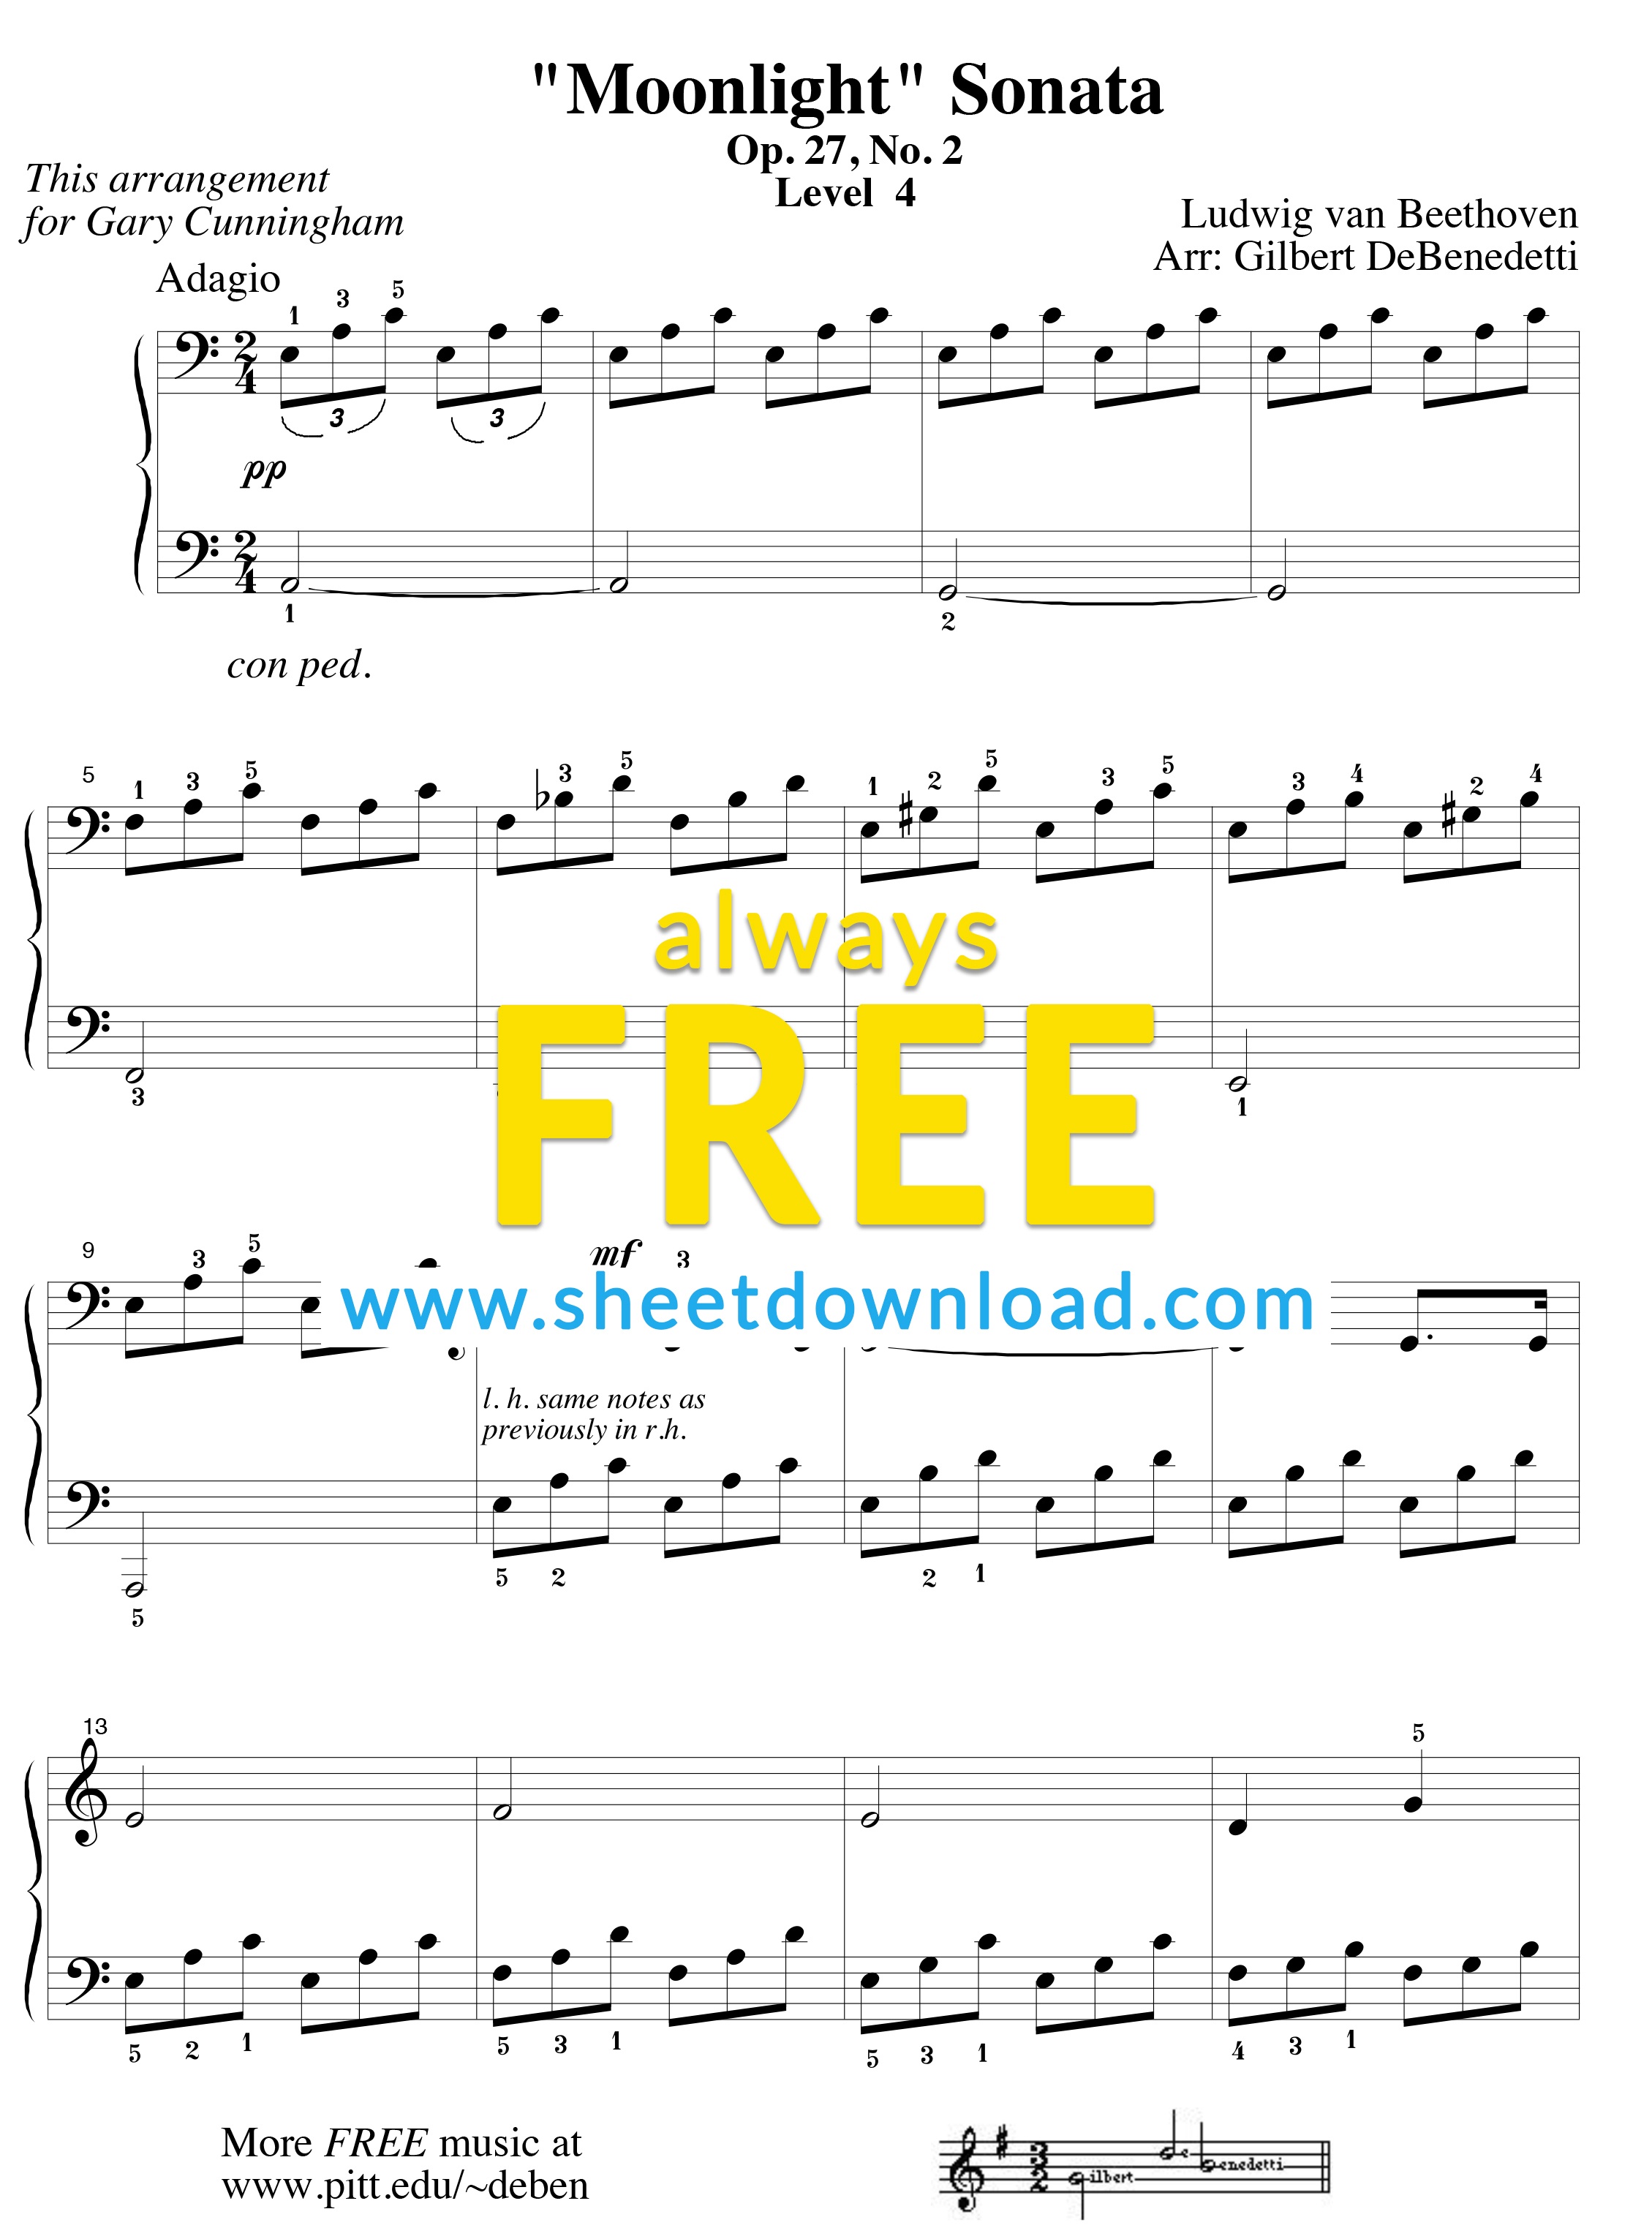 Top 100 Popular Piano Sheets Downloaded From Sheetdownload - Free Printable Piano Sheet Music For Popular Songs